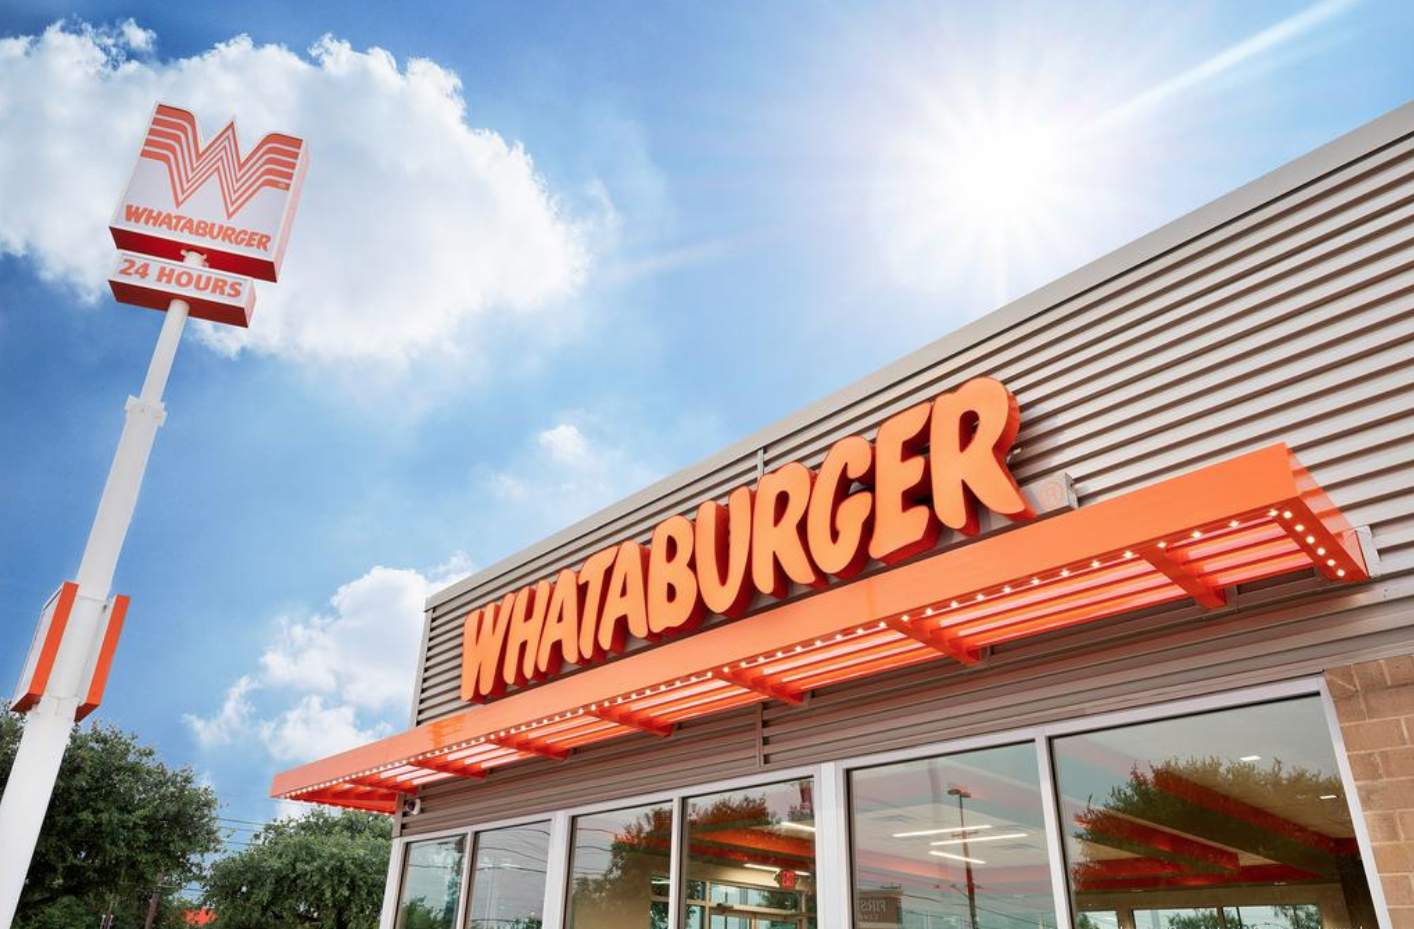 Whataburger confirms expansion into South and Midwest